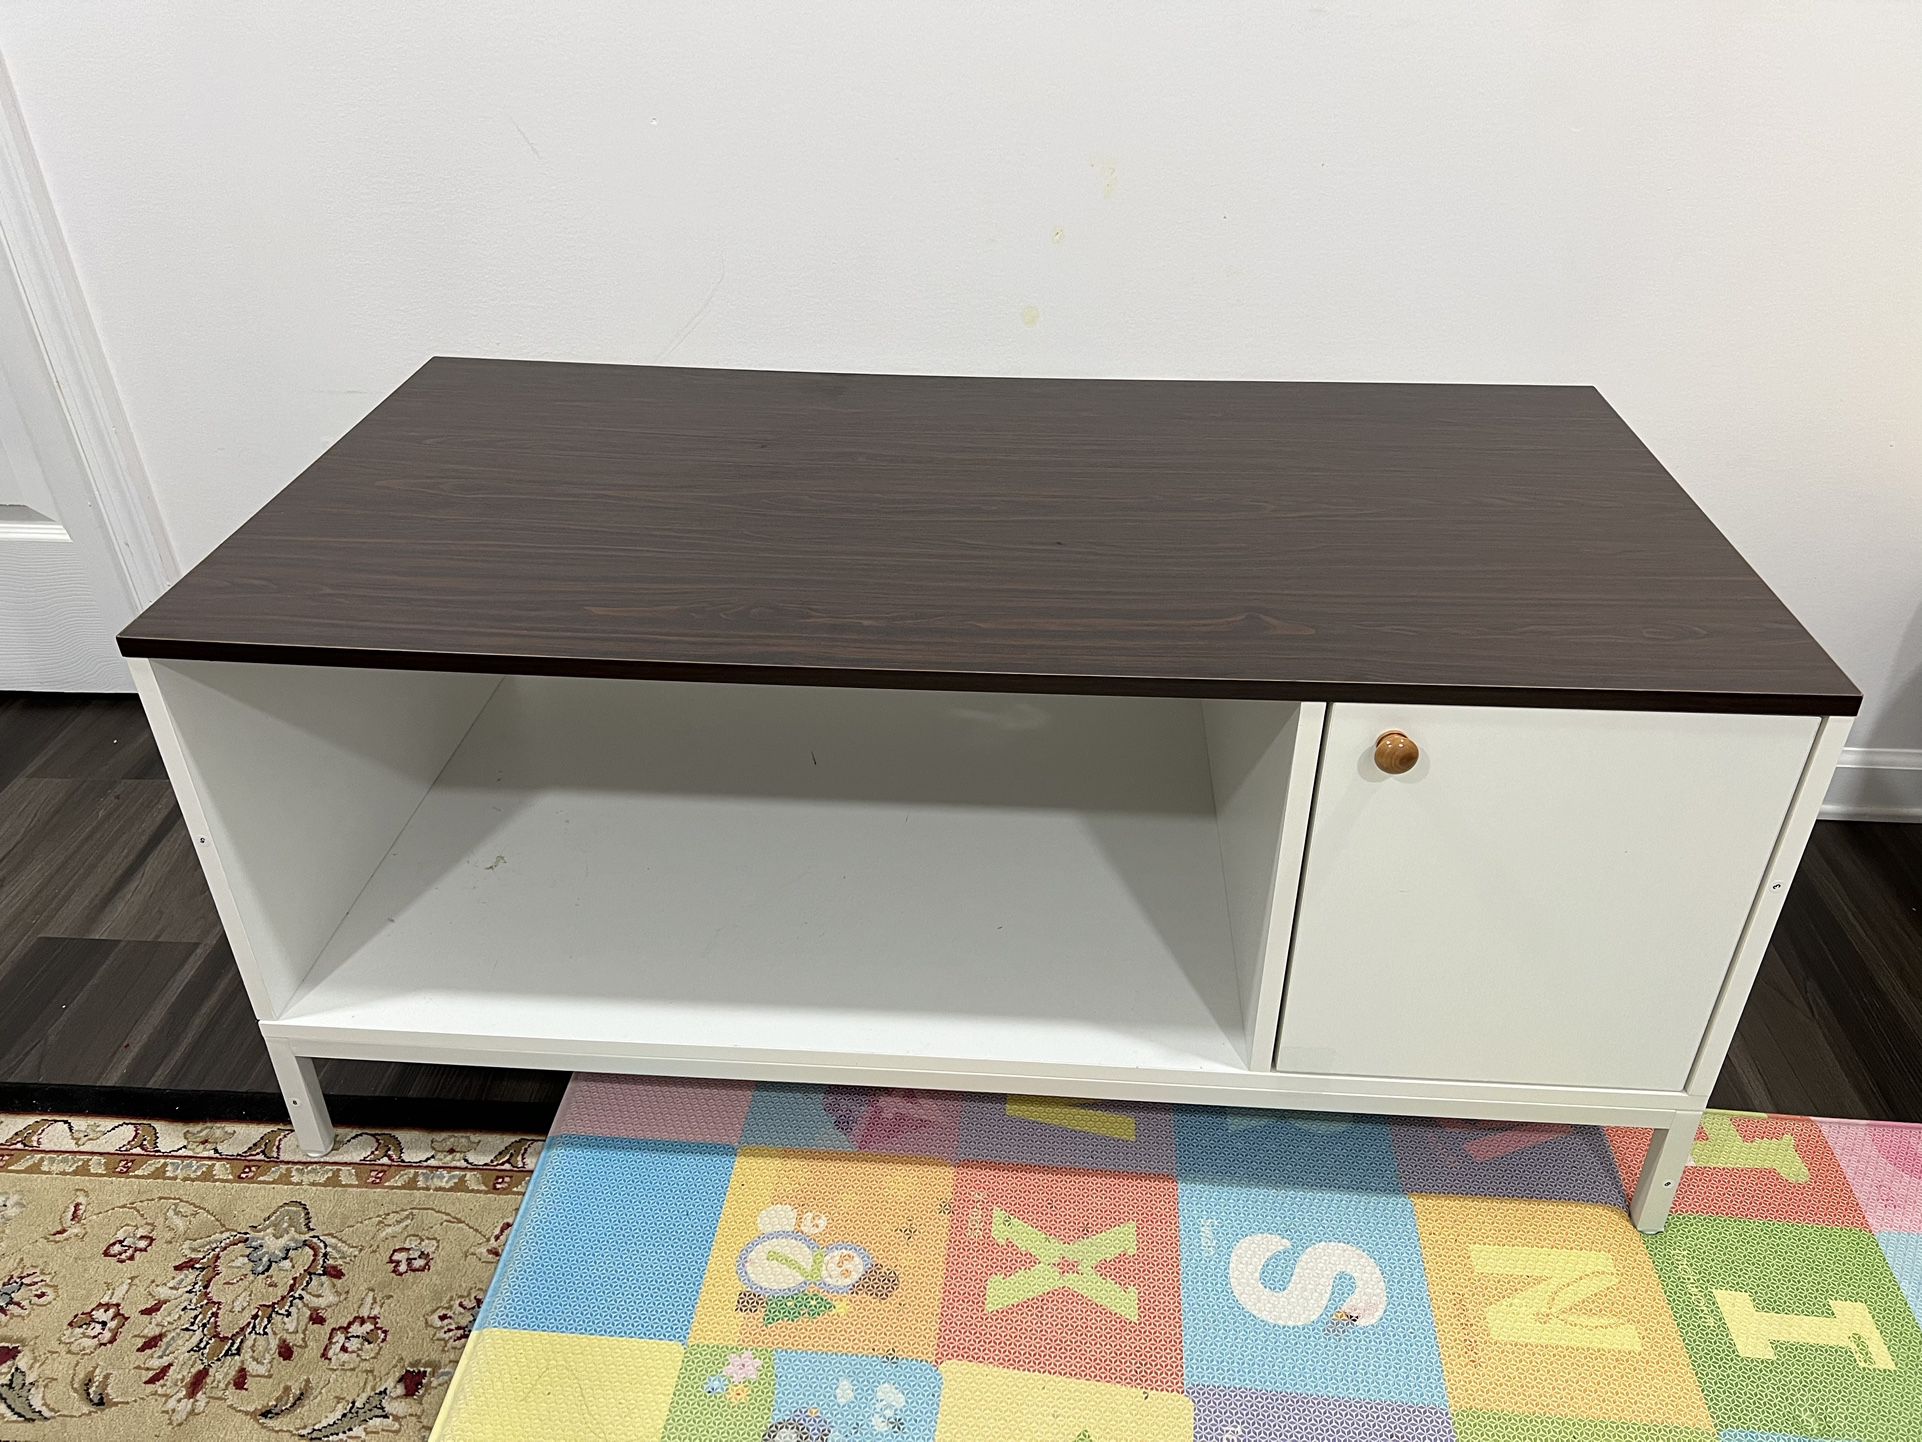 43” Rectangular Coffee Table with Cabinet